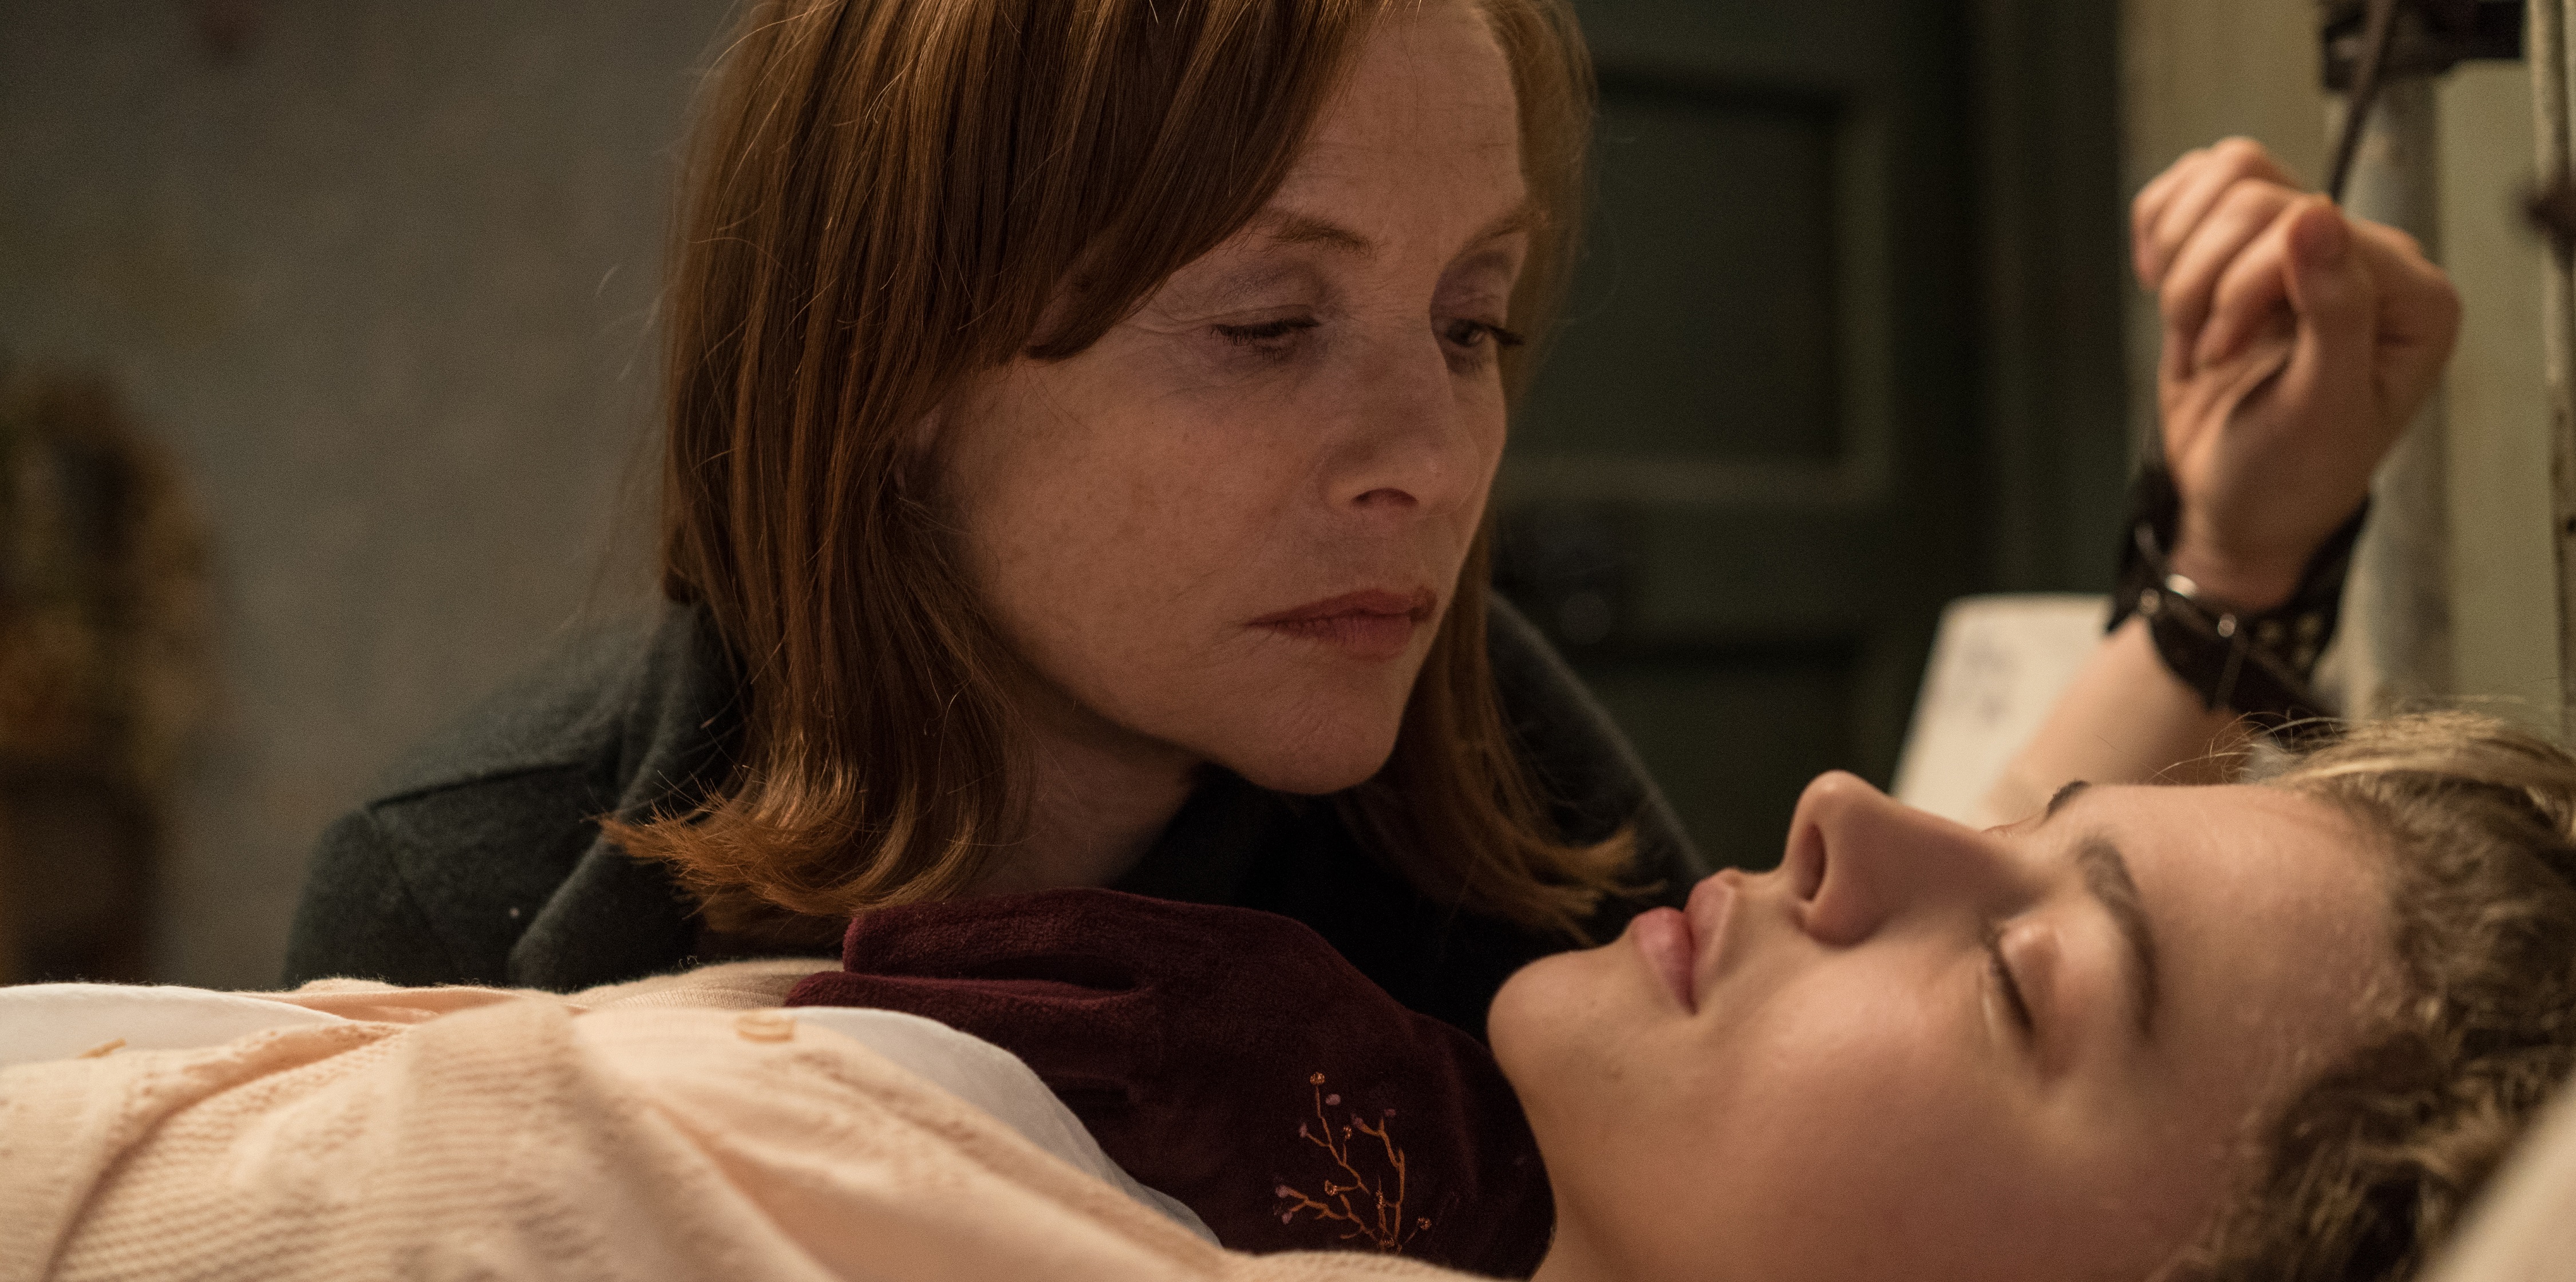 Isabelle Huppert stars as Greta and Chloë Grace Moretz as Frances in Greta, a Focus Features release.